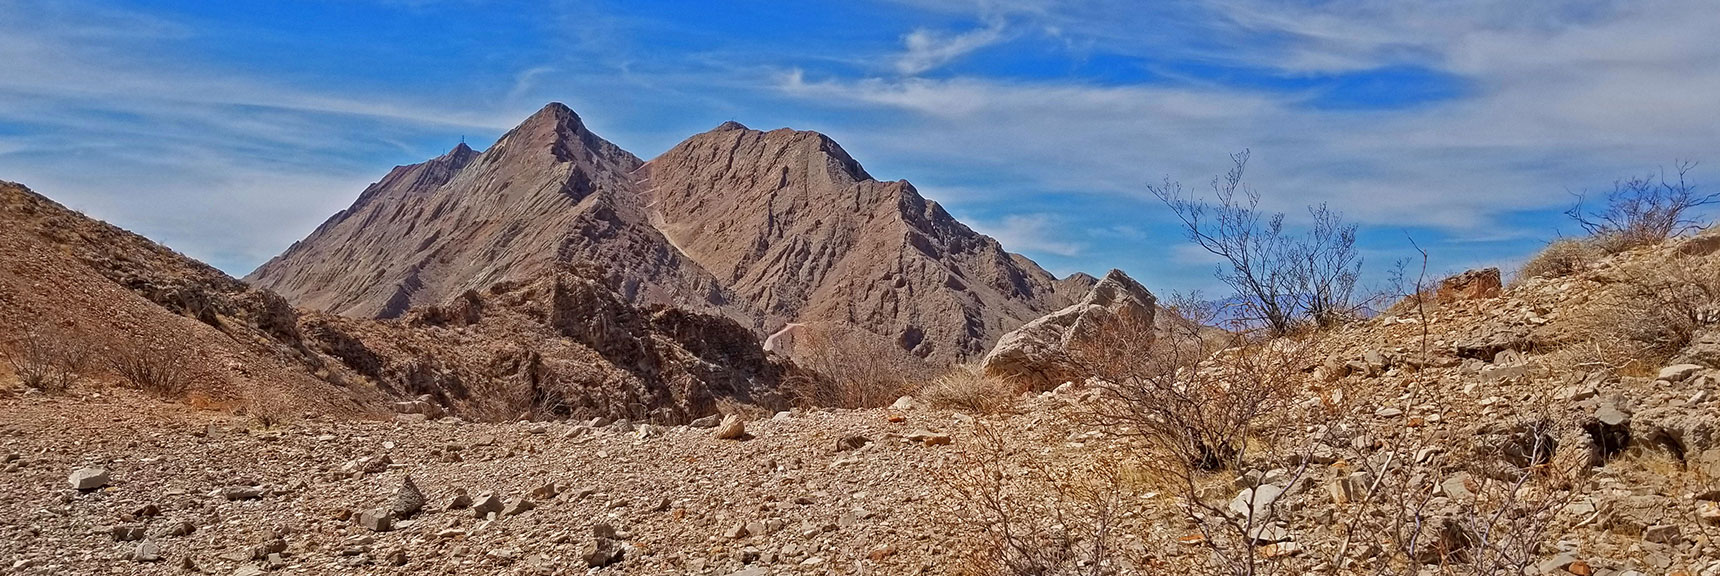 Another High View of Frenchman Mountain from the North | Sunrise Mountain, Las Vegas, Nevada